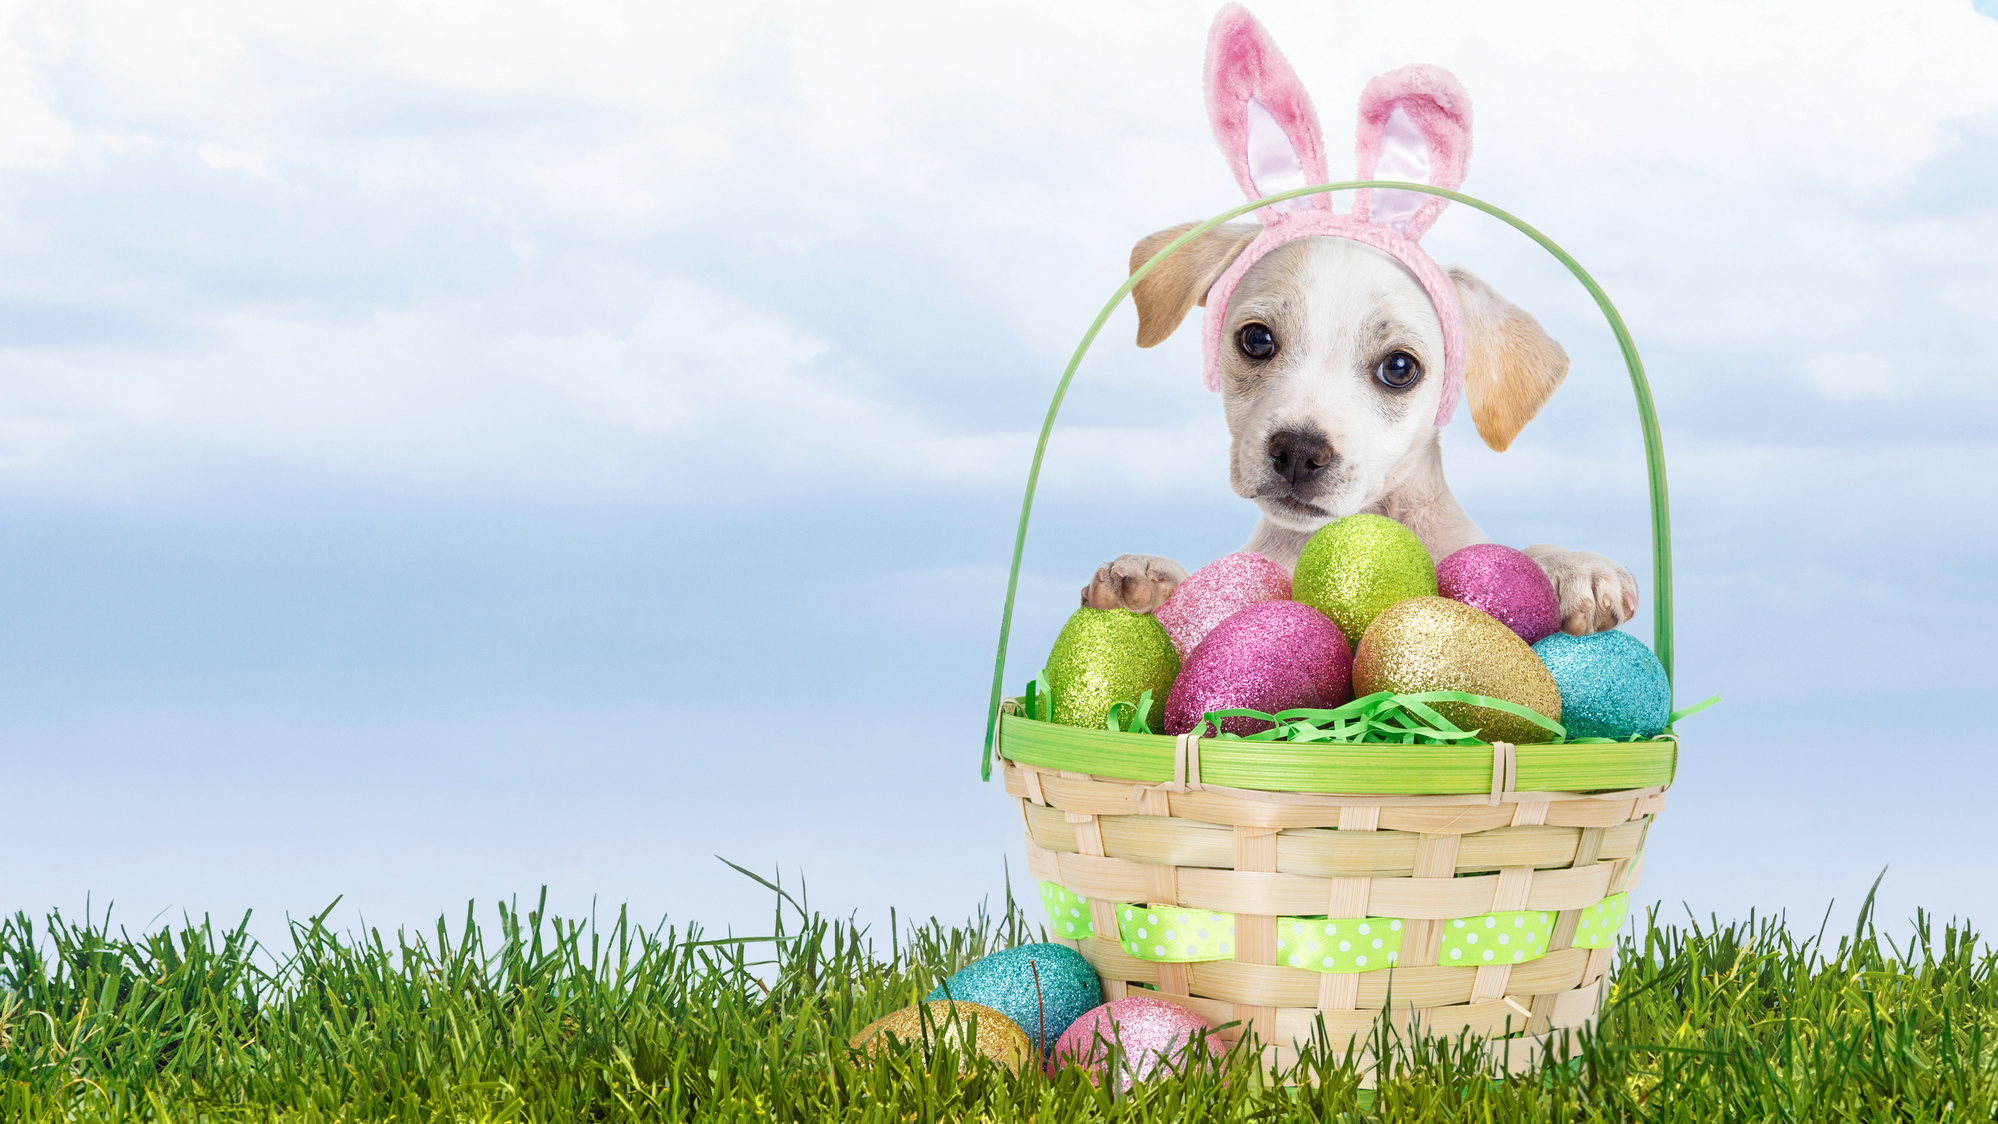 Easter Bunny Picture for Dogs to get your dog's picture taken with the Bunny!